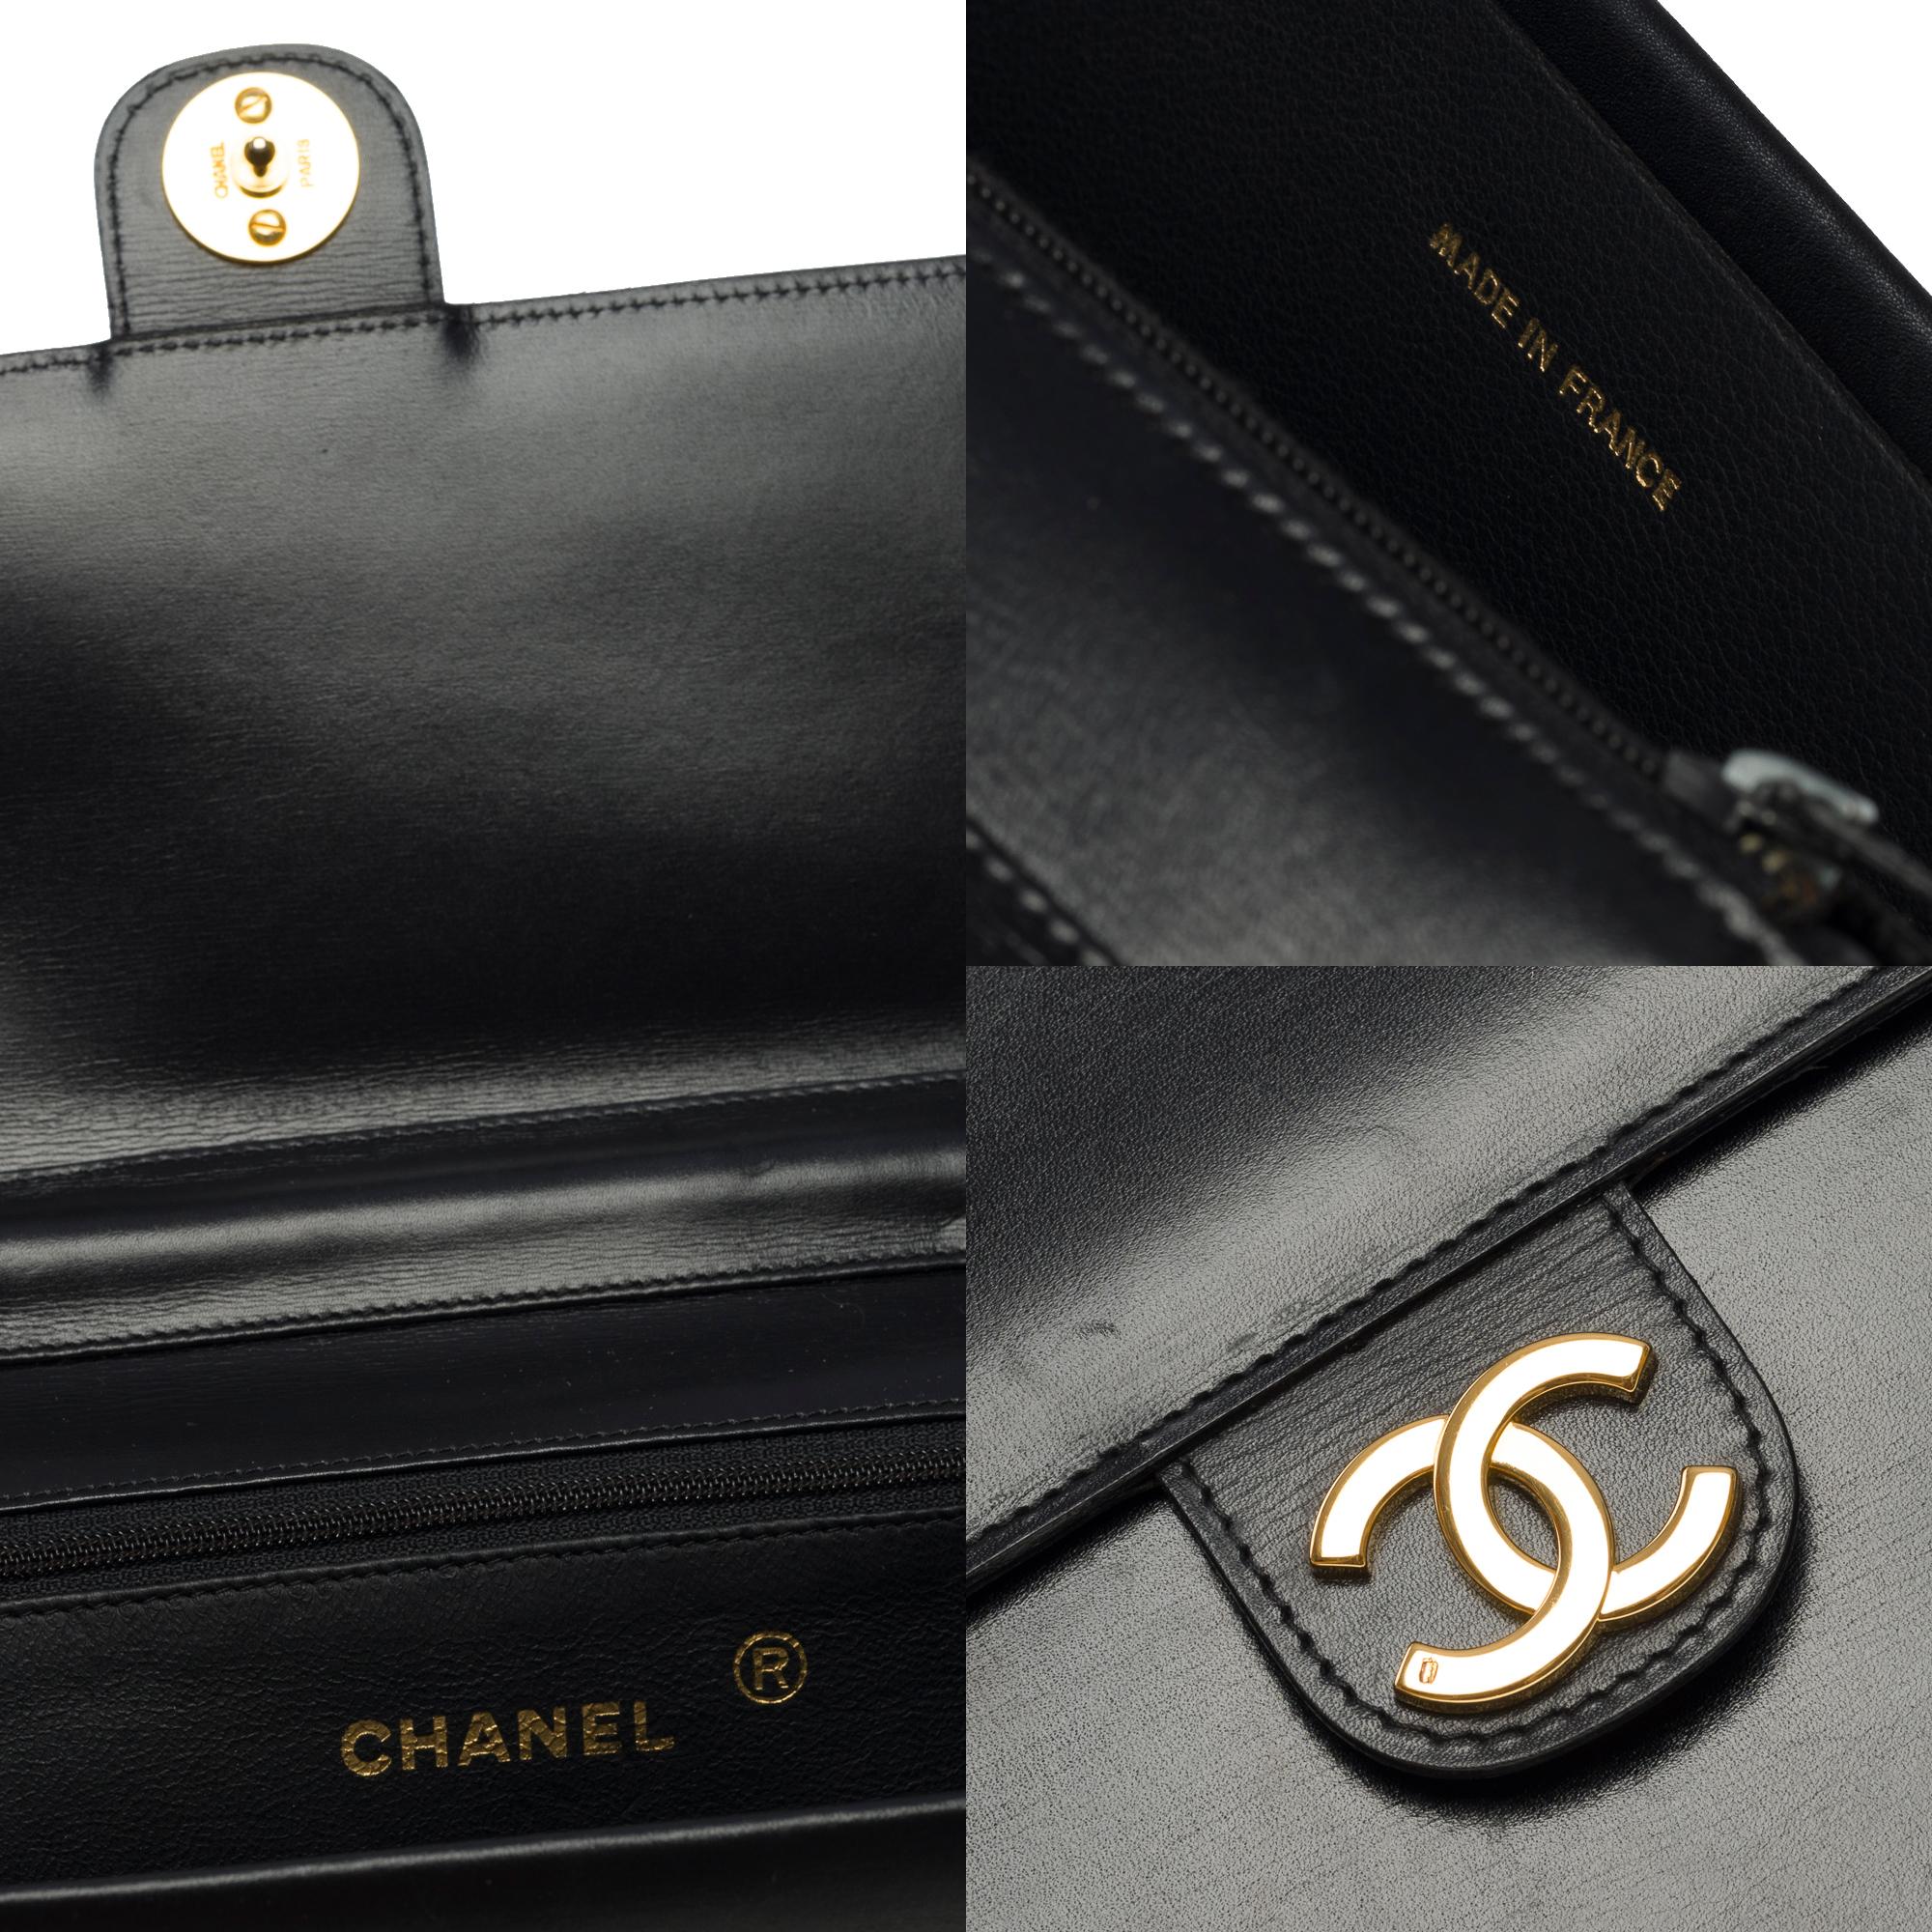 Gorgeous Chanel Classic shoulder flap bag in black box calfskin leather, GHW 1